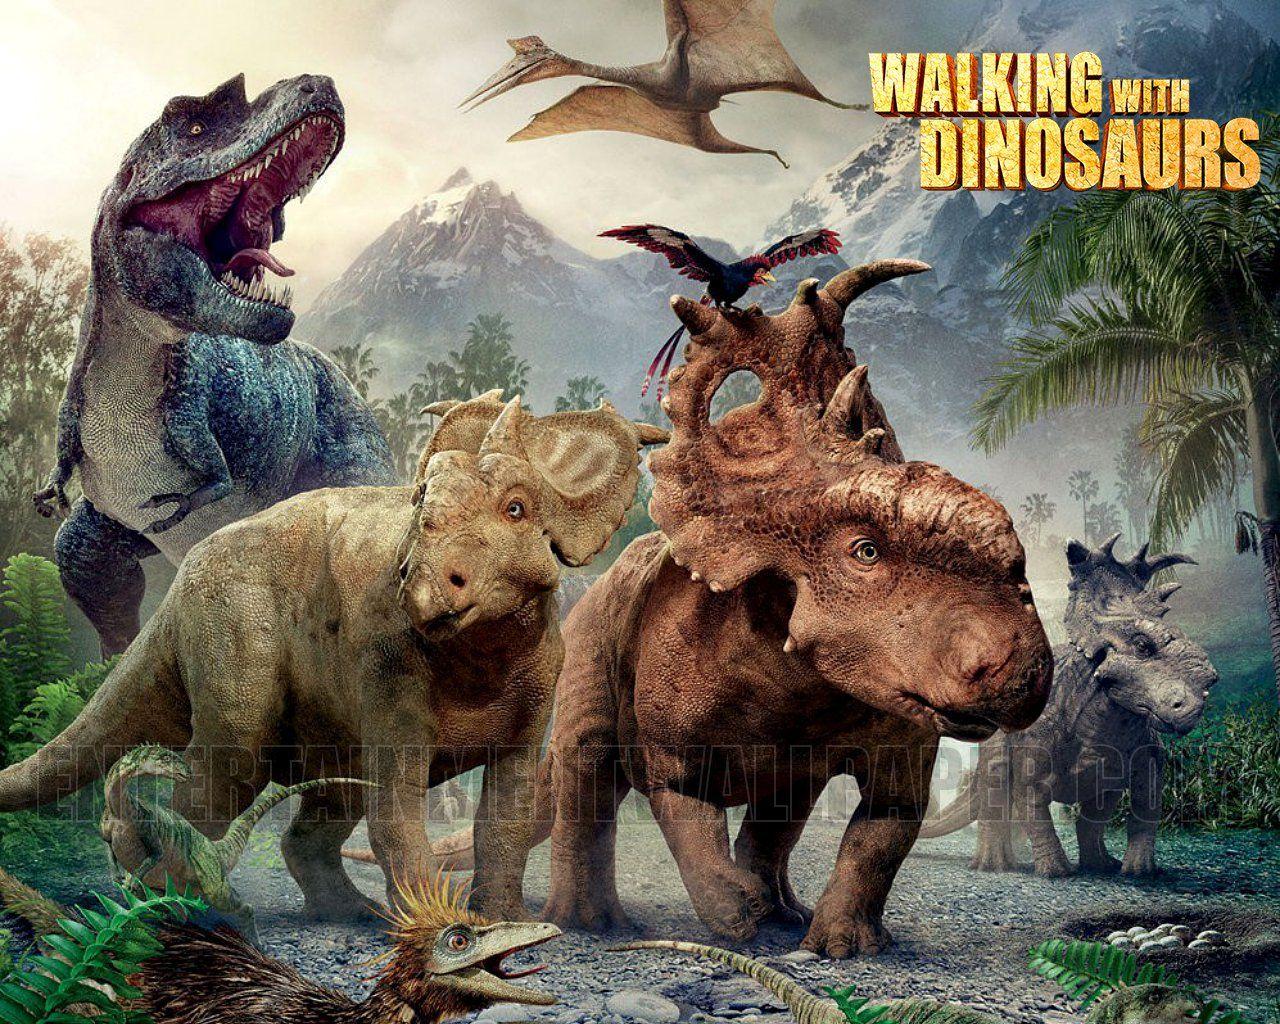 Walking With Dinosaurs HD Wallpaper. High Definitions Wallpaper